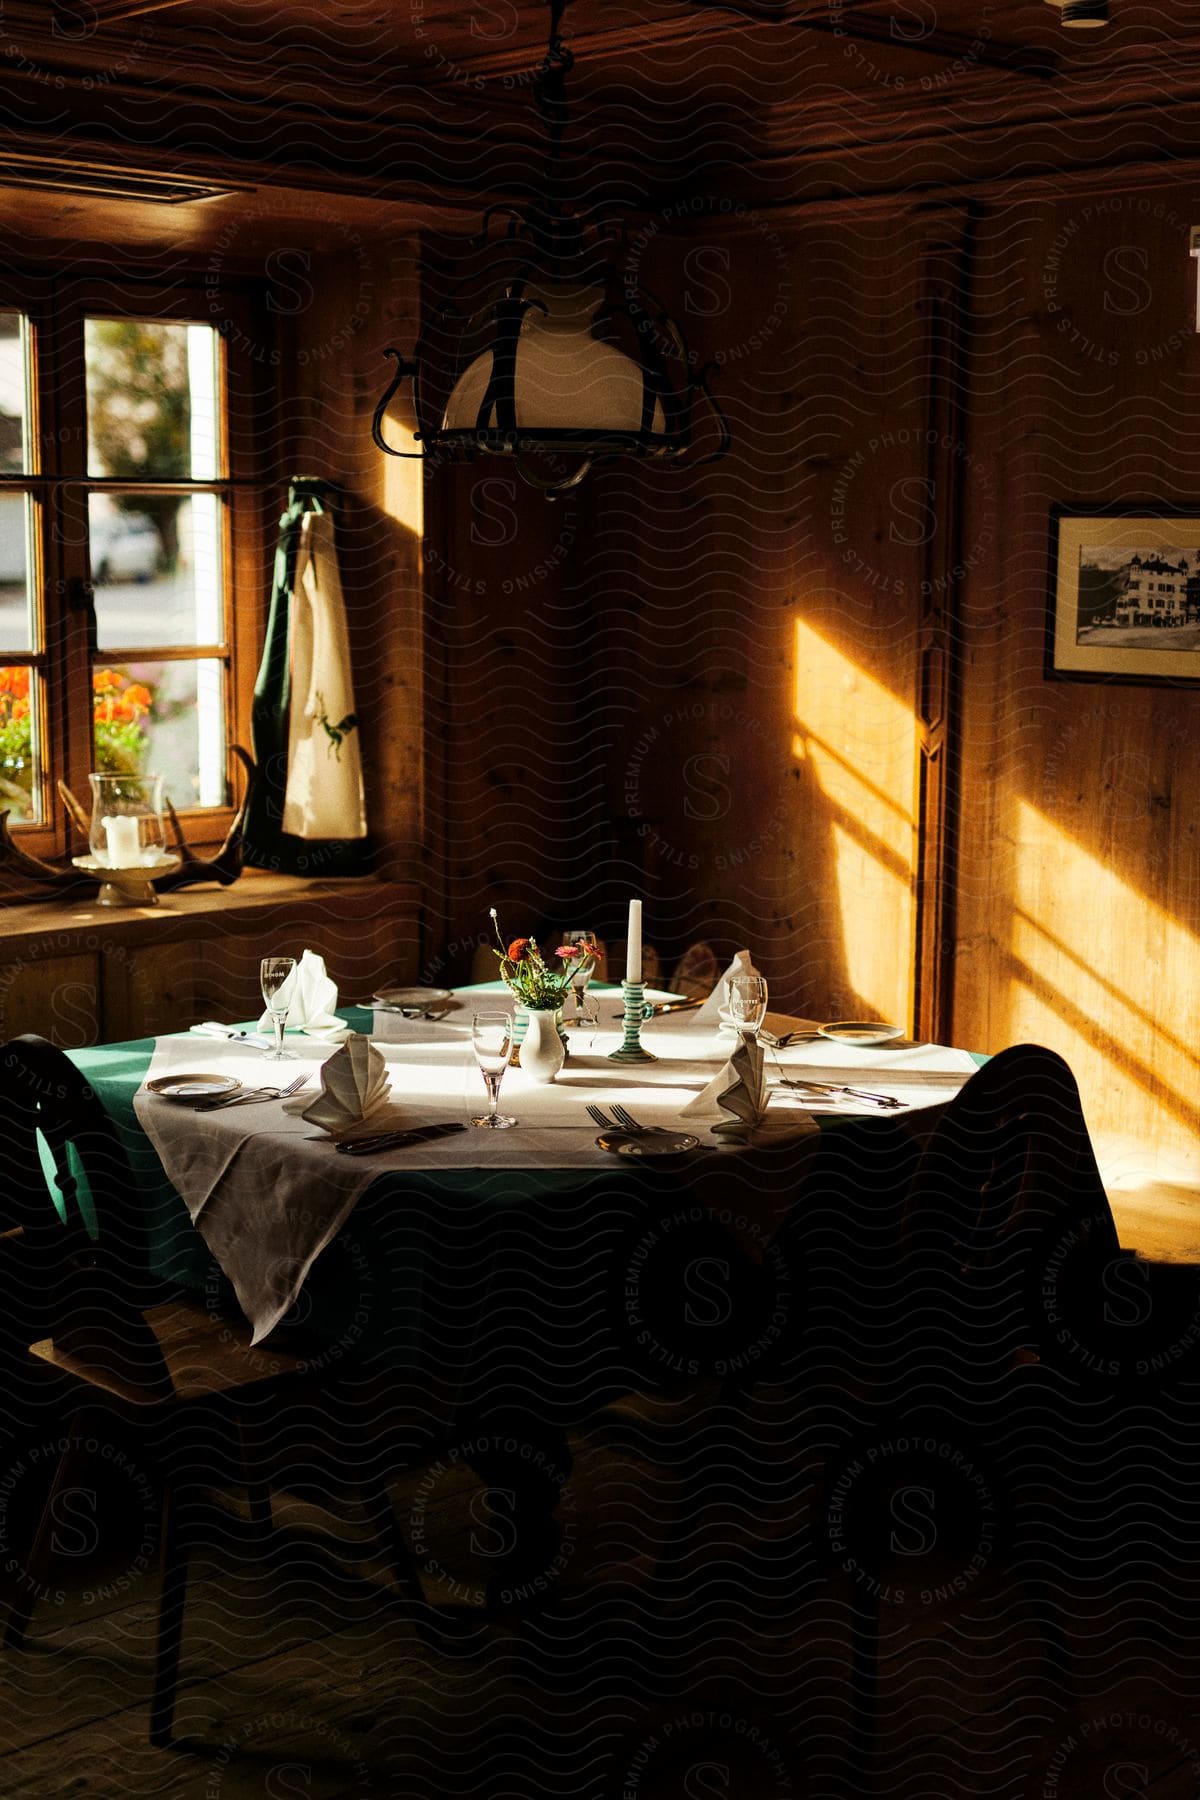 The interior of a wooden house where there is a table with chairs and the table is set with cutlery plates and glasses and there is a window where sunlight is passing through